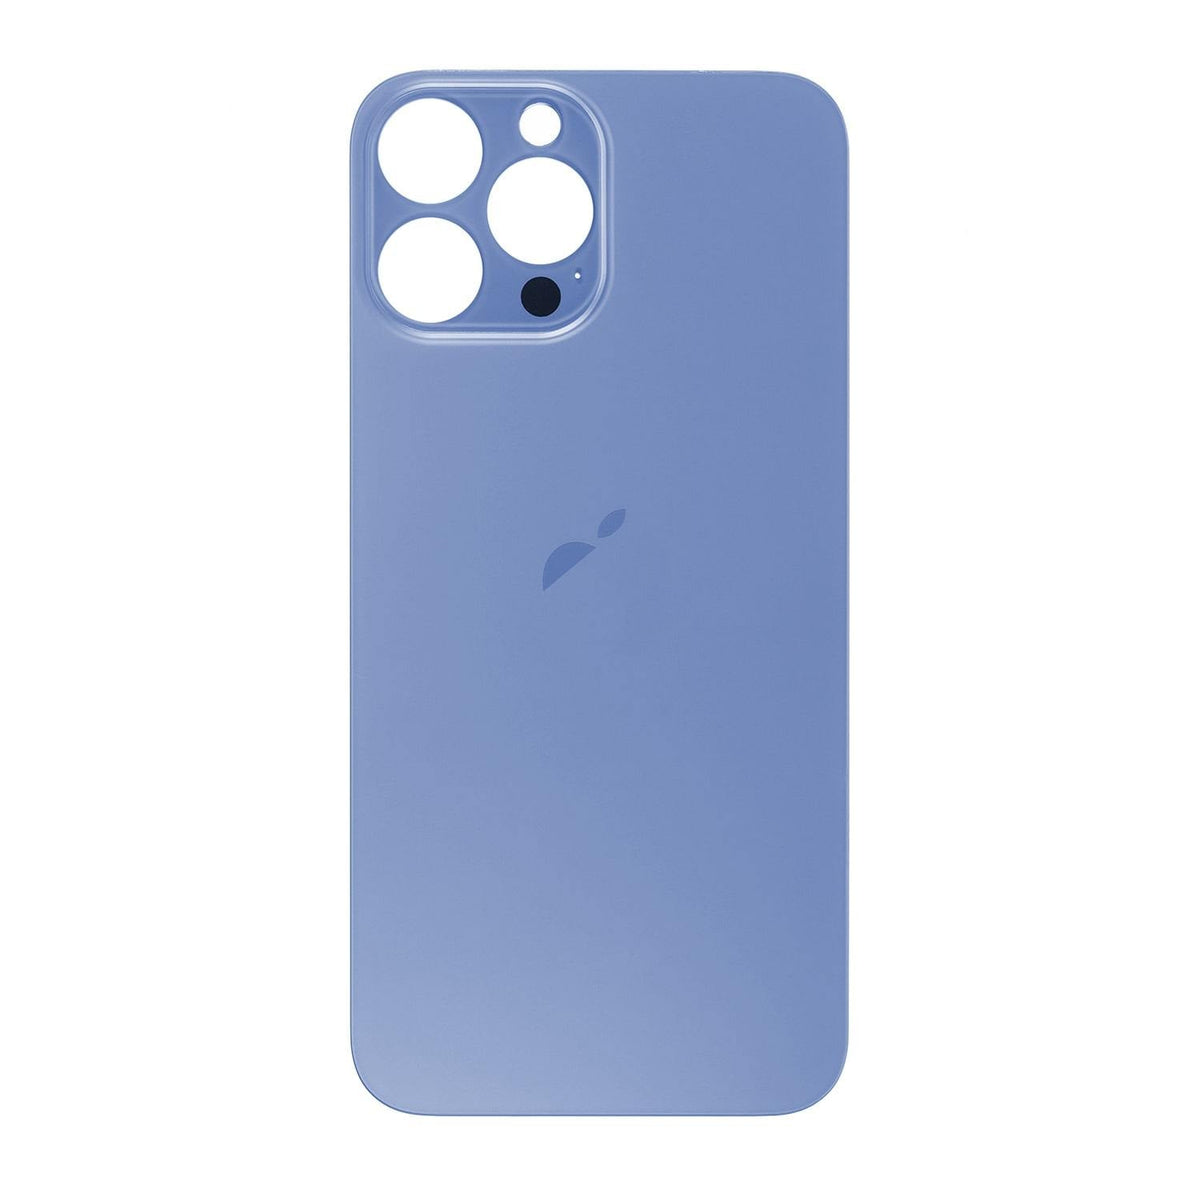 SIERRA BLUE BACK COVER GLASS FOR IPHONE 13 PRO